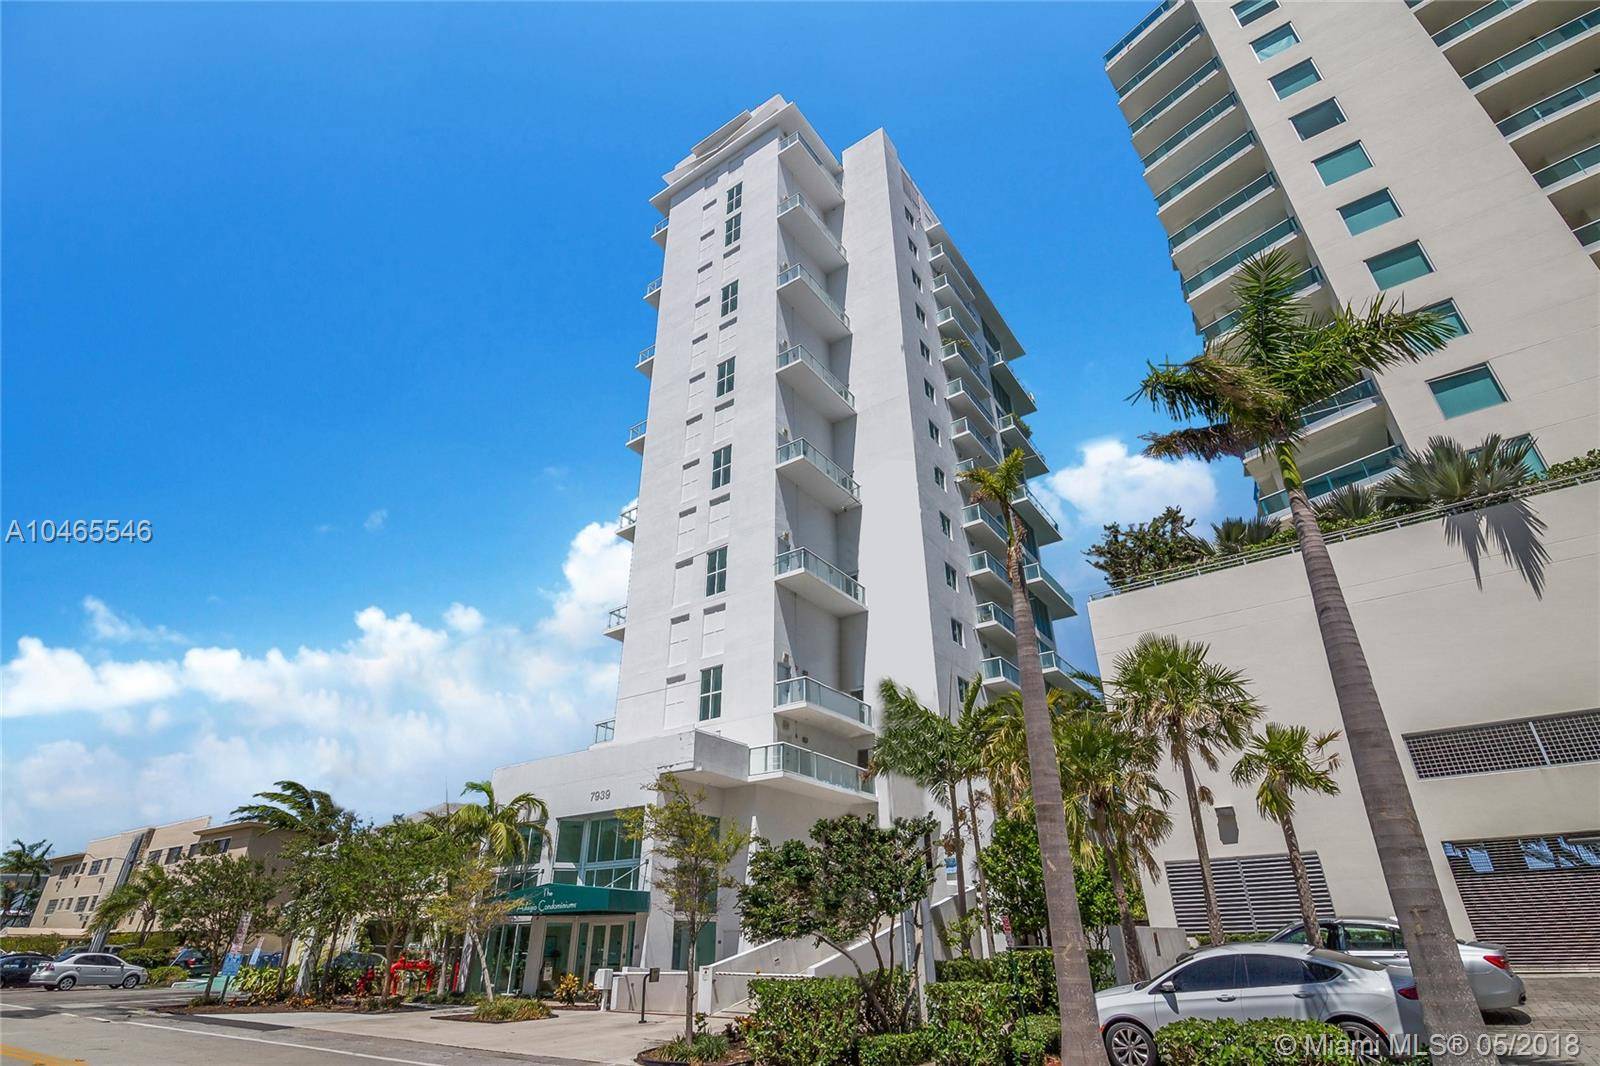 Modern, 15 story waterfront condo building on the wide bay in North Bay Village, approved for short term rentals !